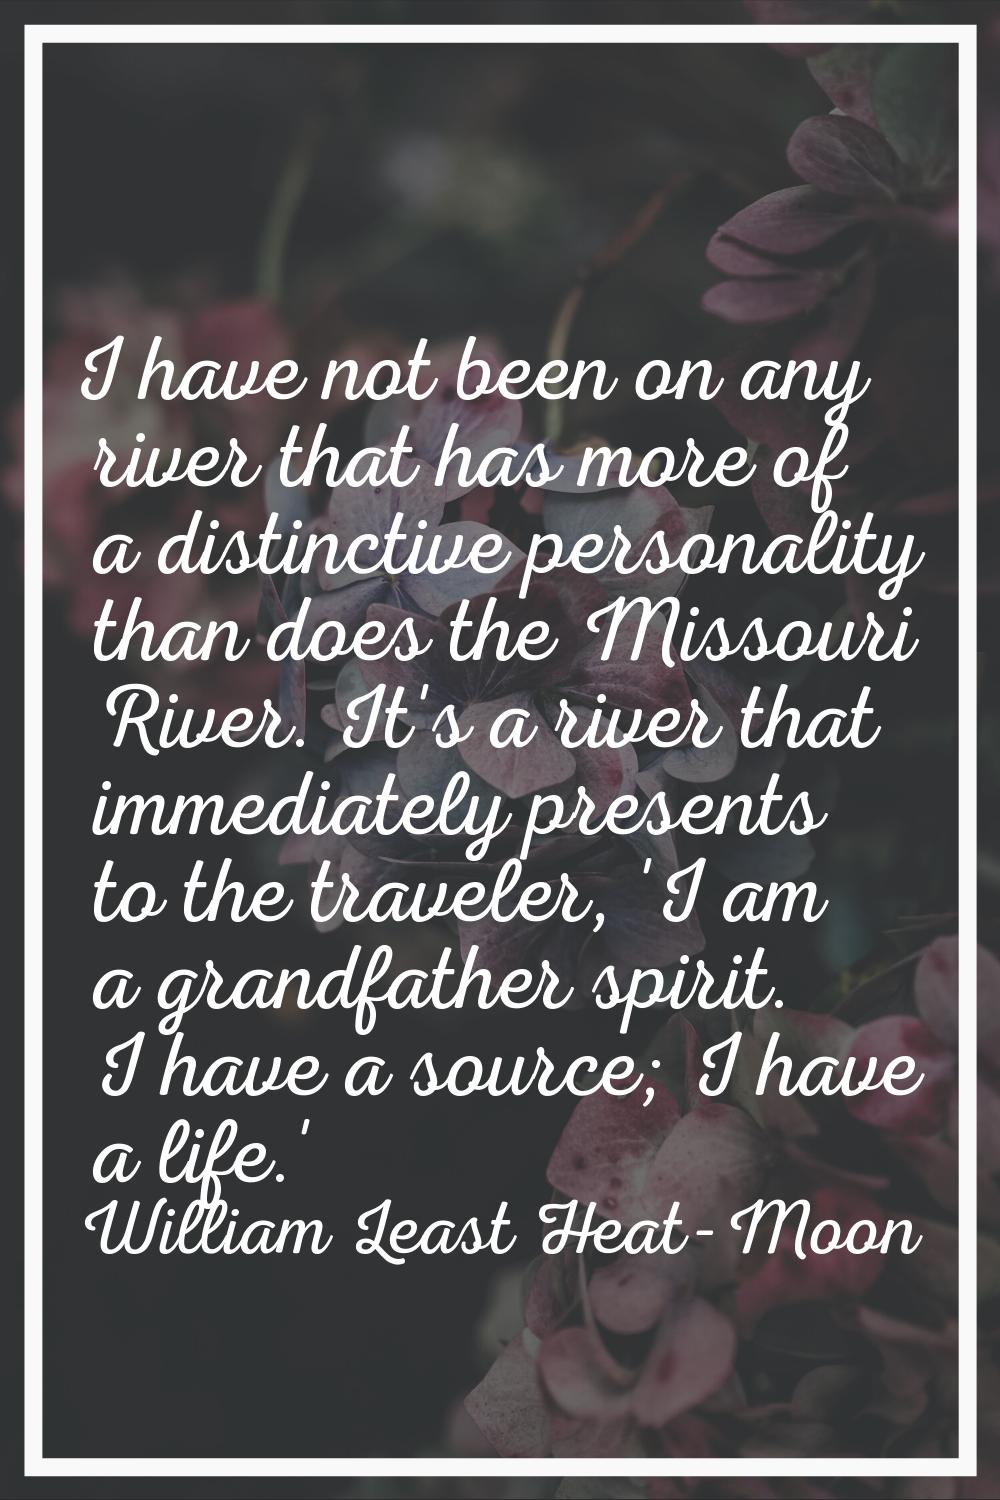 I have not been on any river that has more of a distinctive personality than does the Missouri Rive